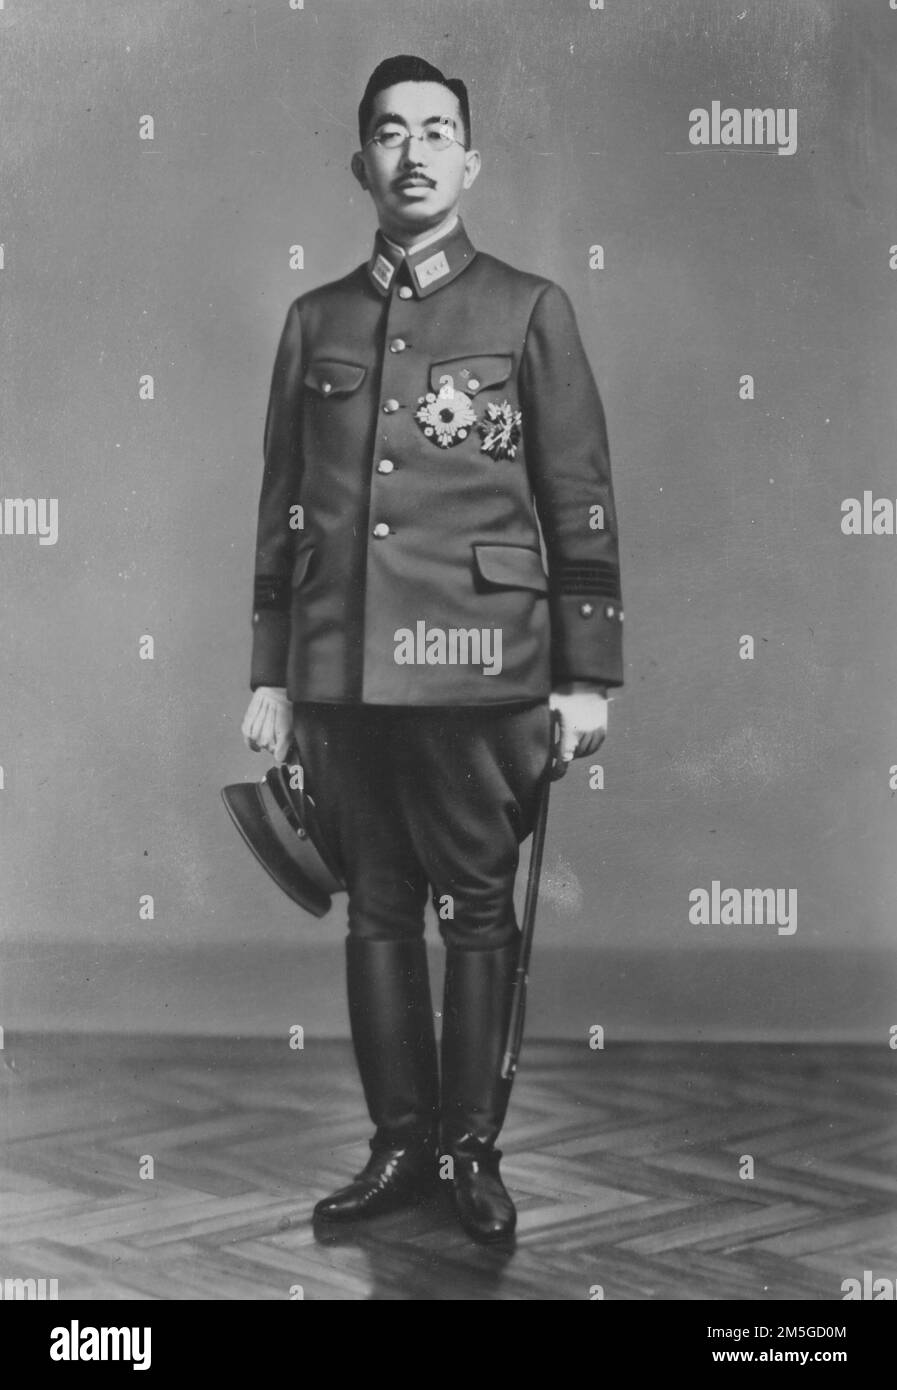 Emperor Showa, also known as Emperor Hirohito—the 124th Emperor and ruler of Japan from 1926 to 1989—pictured in his Imperial Japanese Army Commander-in-Chief's Type 3 (1943) service uniform, January 1944. Stock Photo